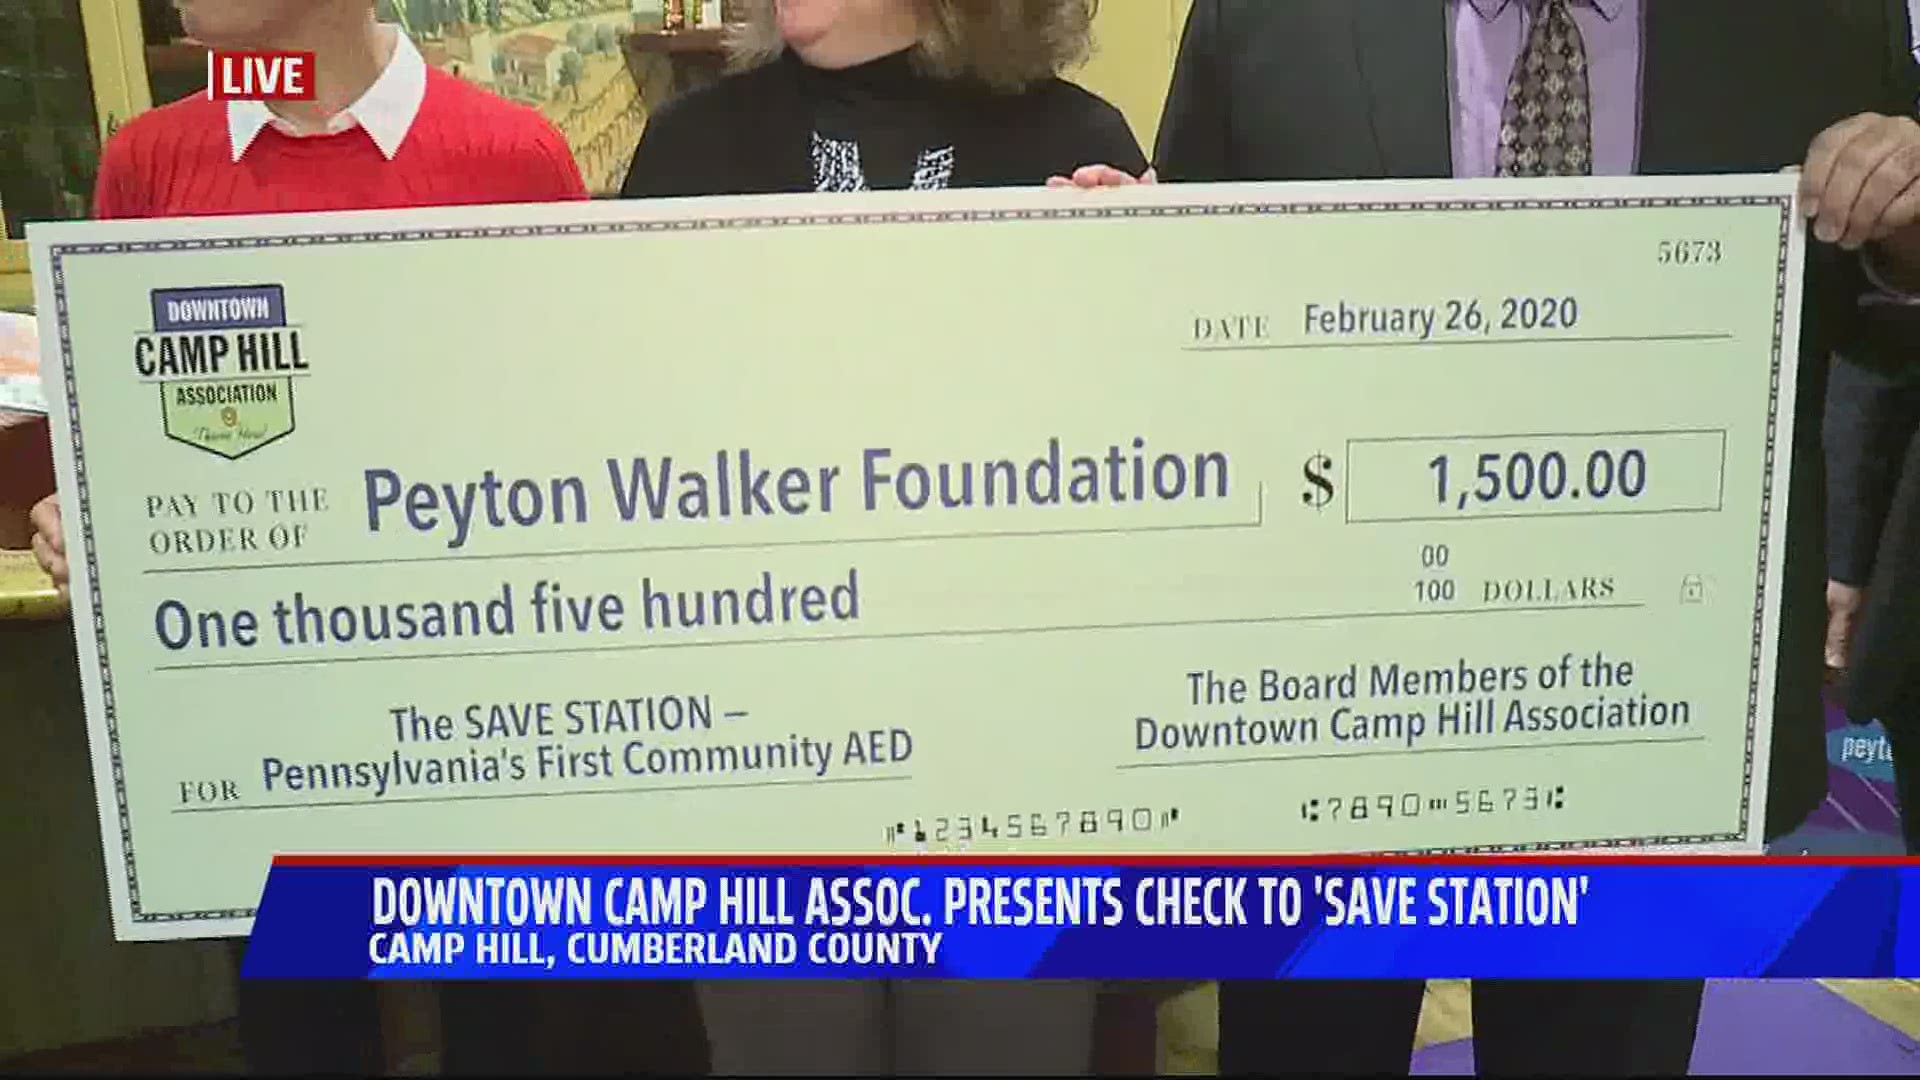 The Peyton Walker Foundation to increase awareness of sudden cardiac arrest. They were presented a check today for one thousand five hundred dollars